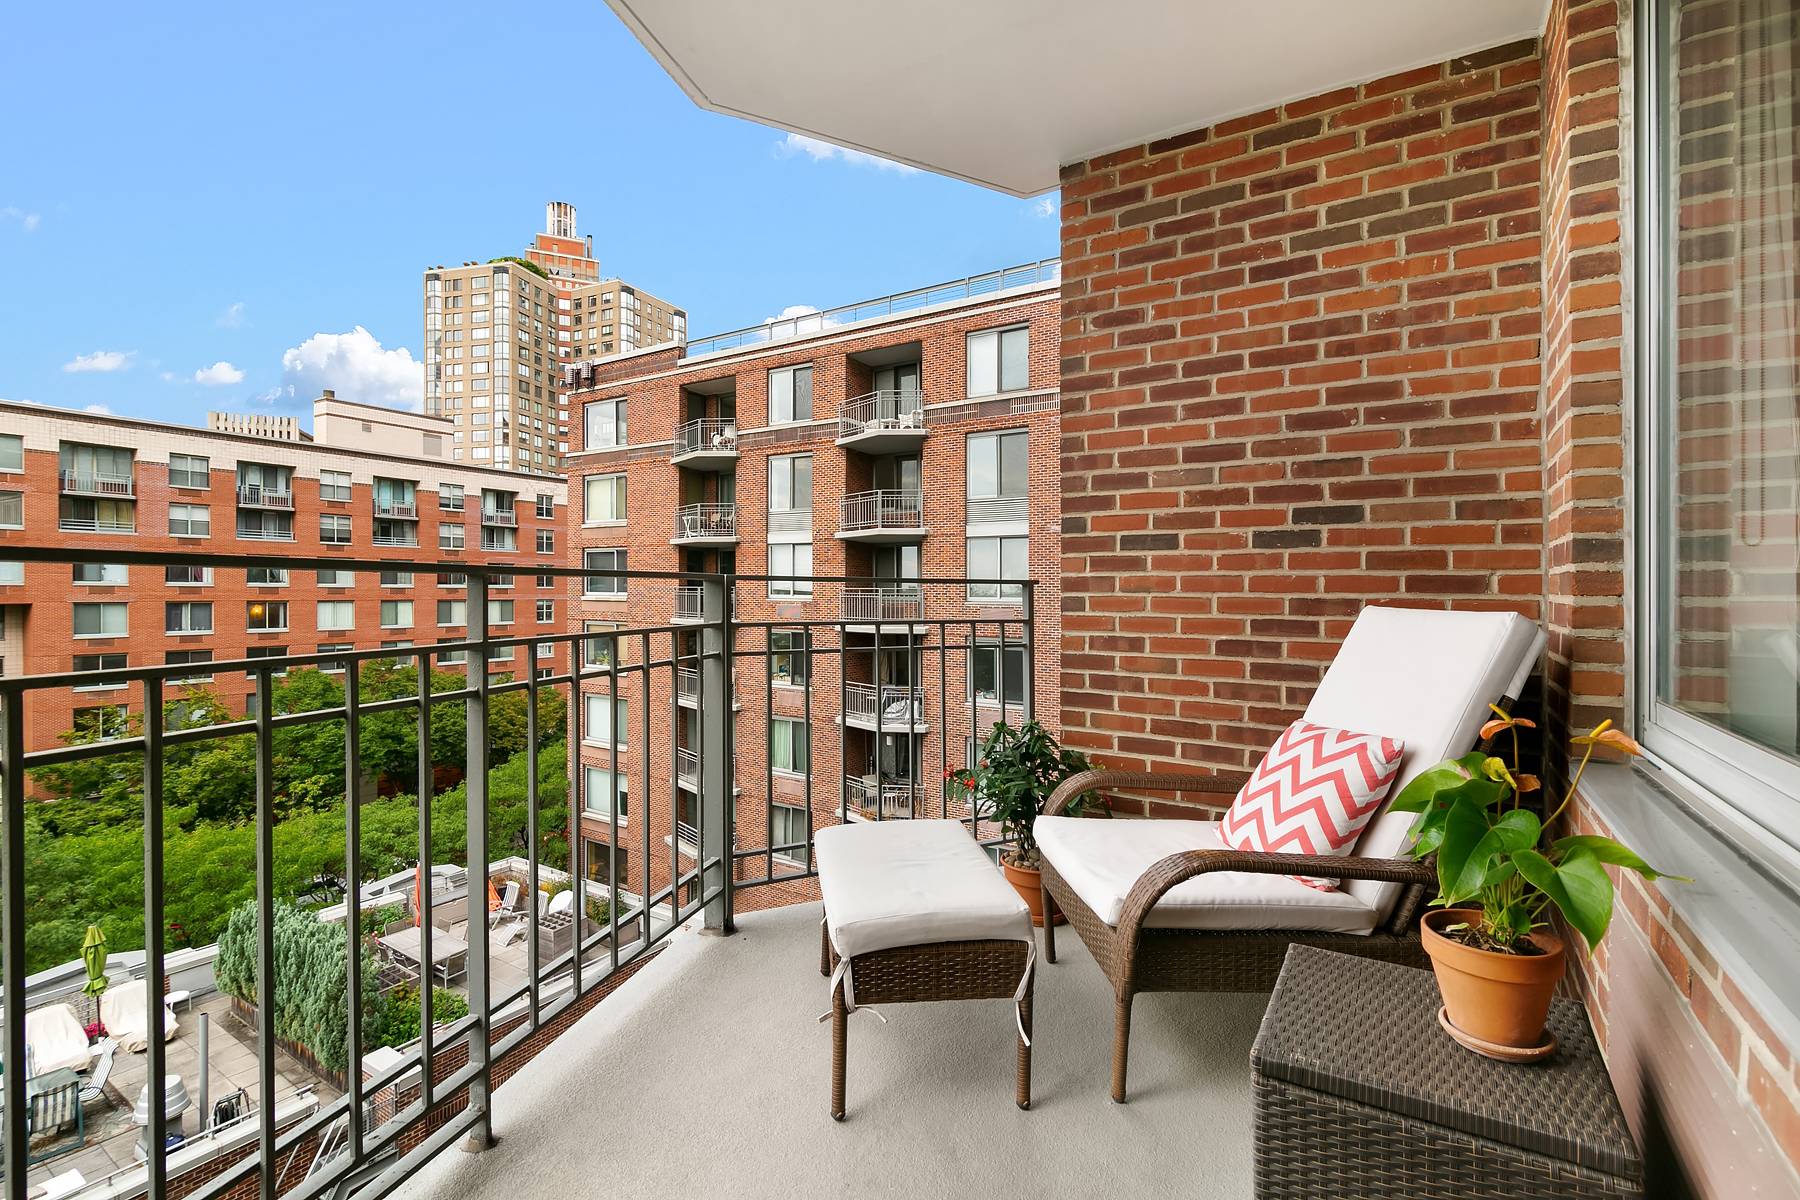 Bask in glorious sunsets and shimmering river views from your extra large balcony in this exceptional one bedroom, one bathroom home in a full service Battery Park City condominium.